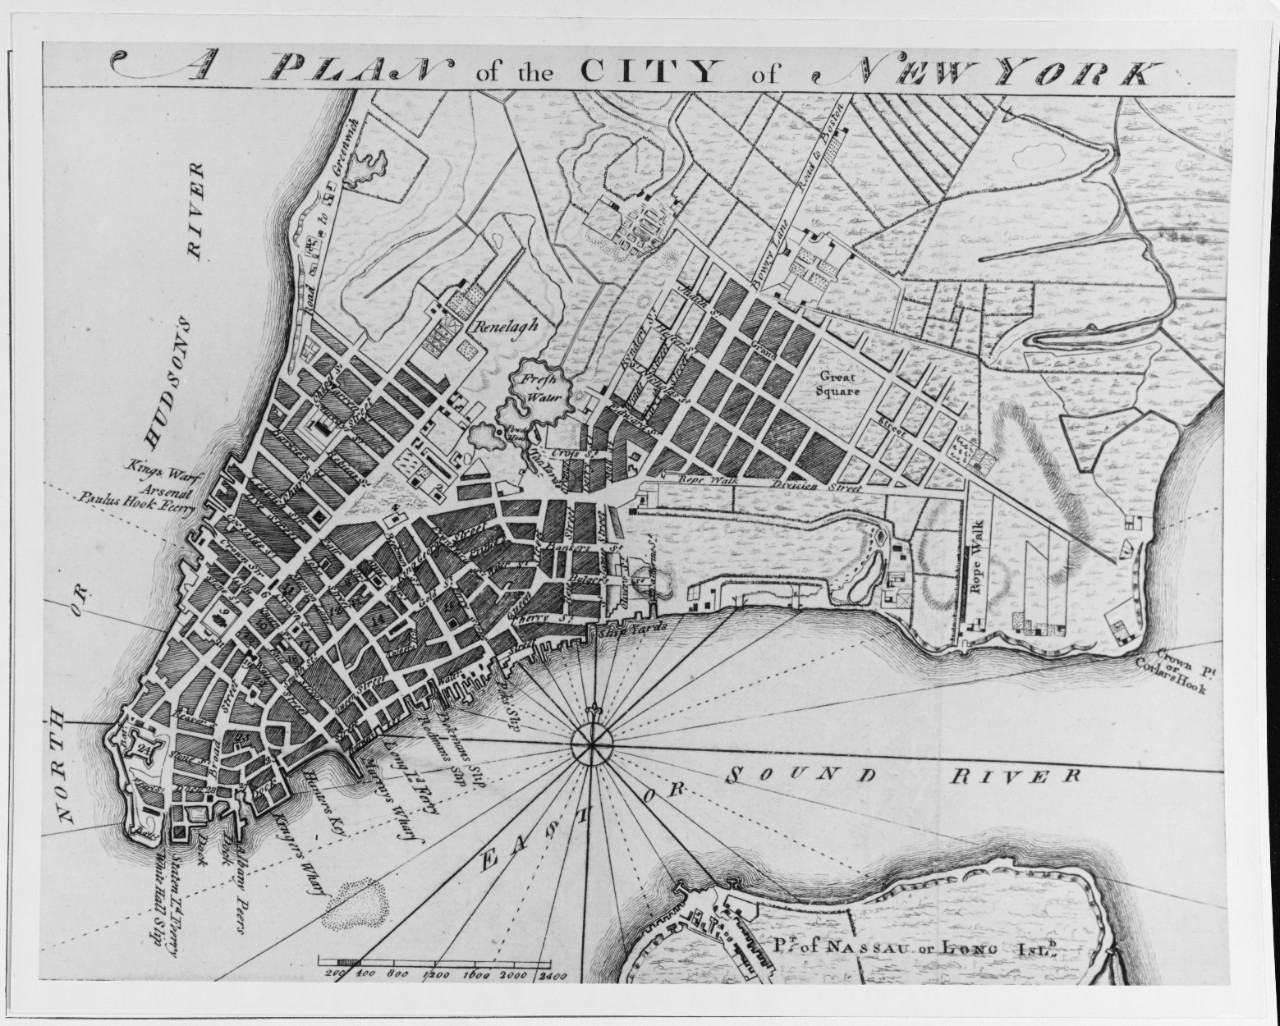 "A plan of the city of New York"